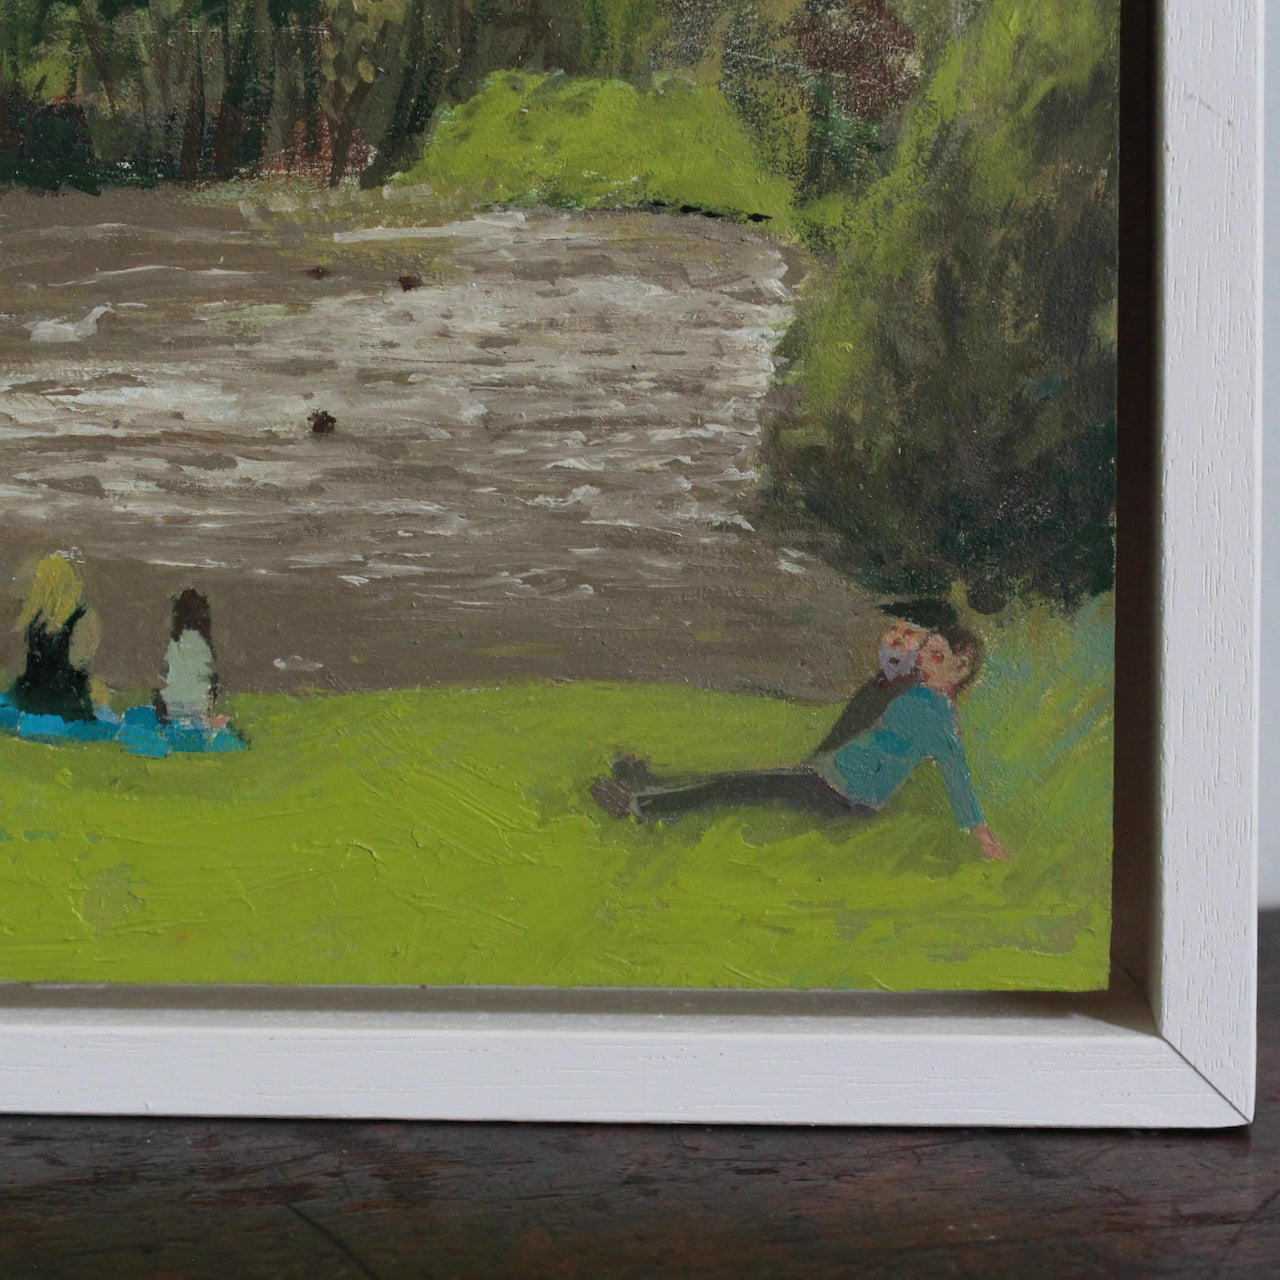 detail of a painting by Cornish artist Siobhan Purdy of people sitting on the grass in front of a lake.